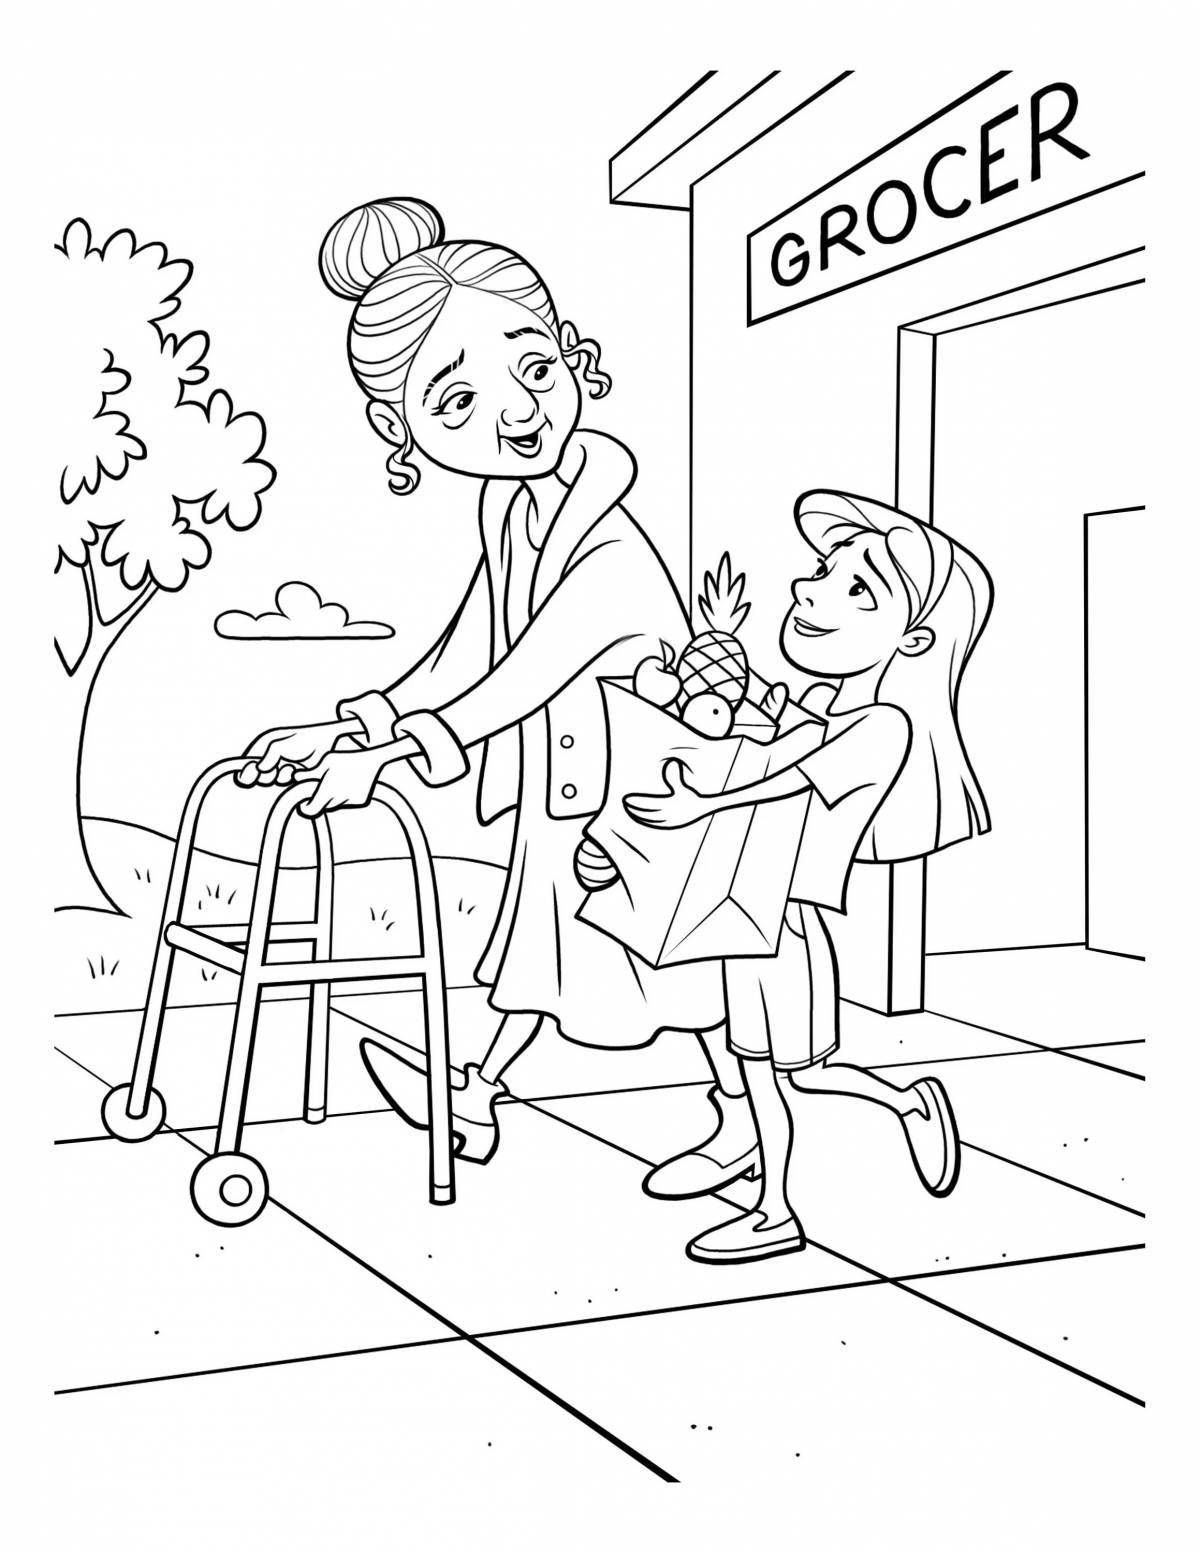 Fun etiquette coloring book for 6-7 year olds